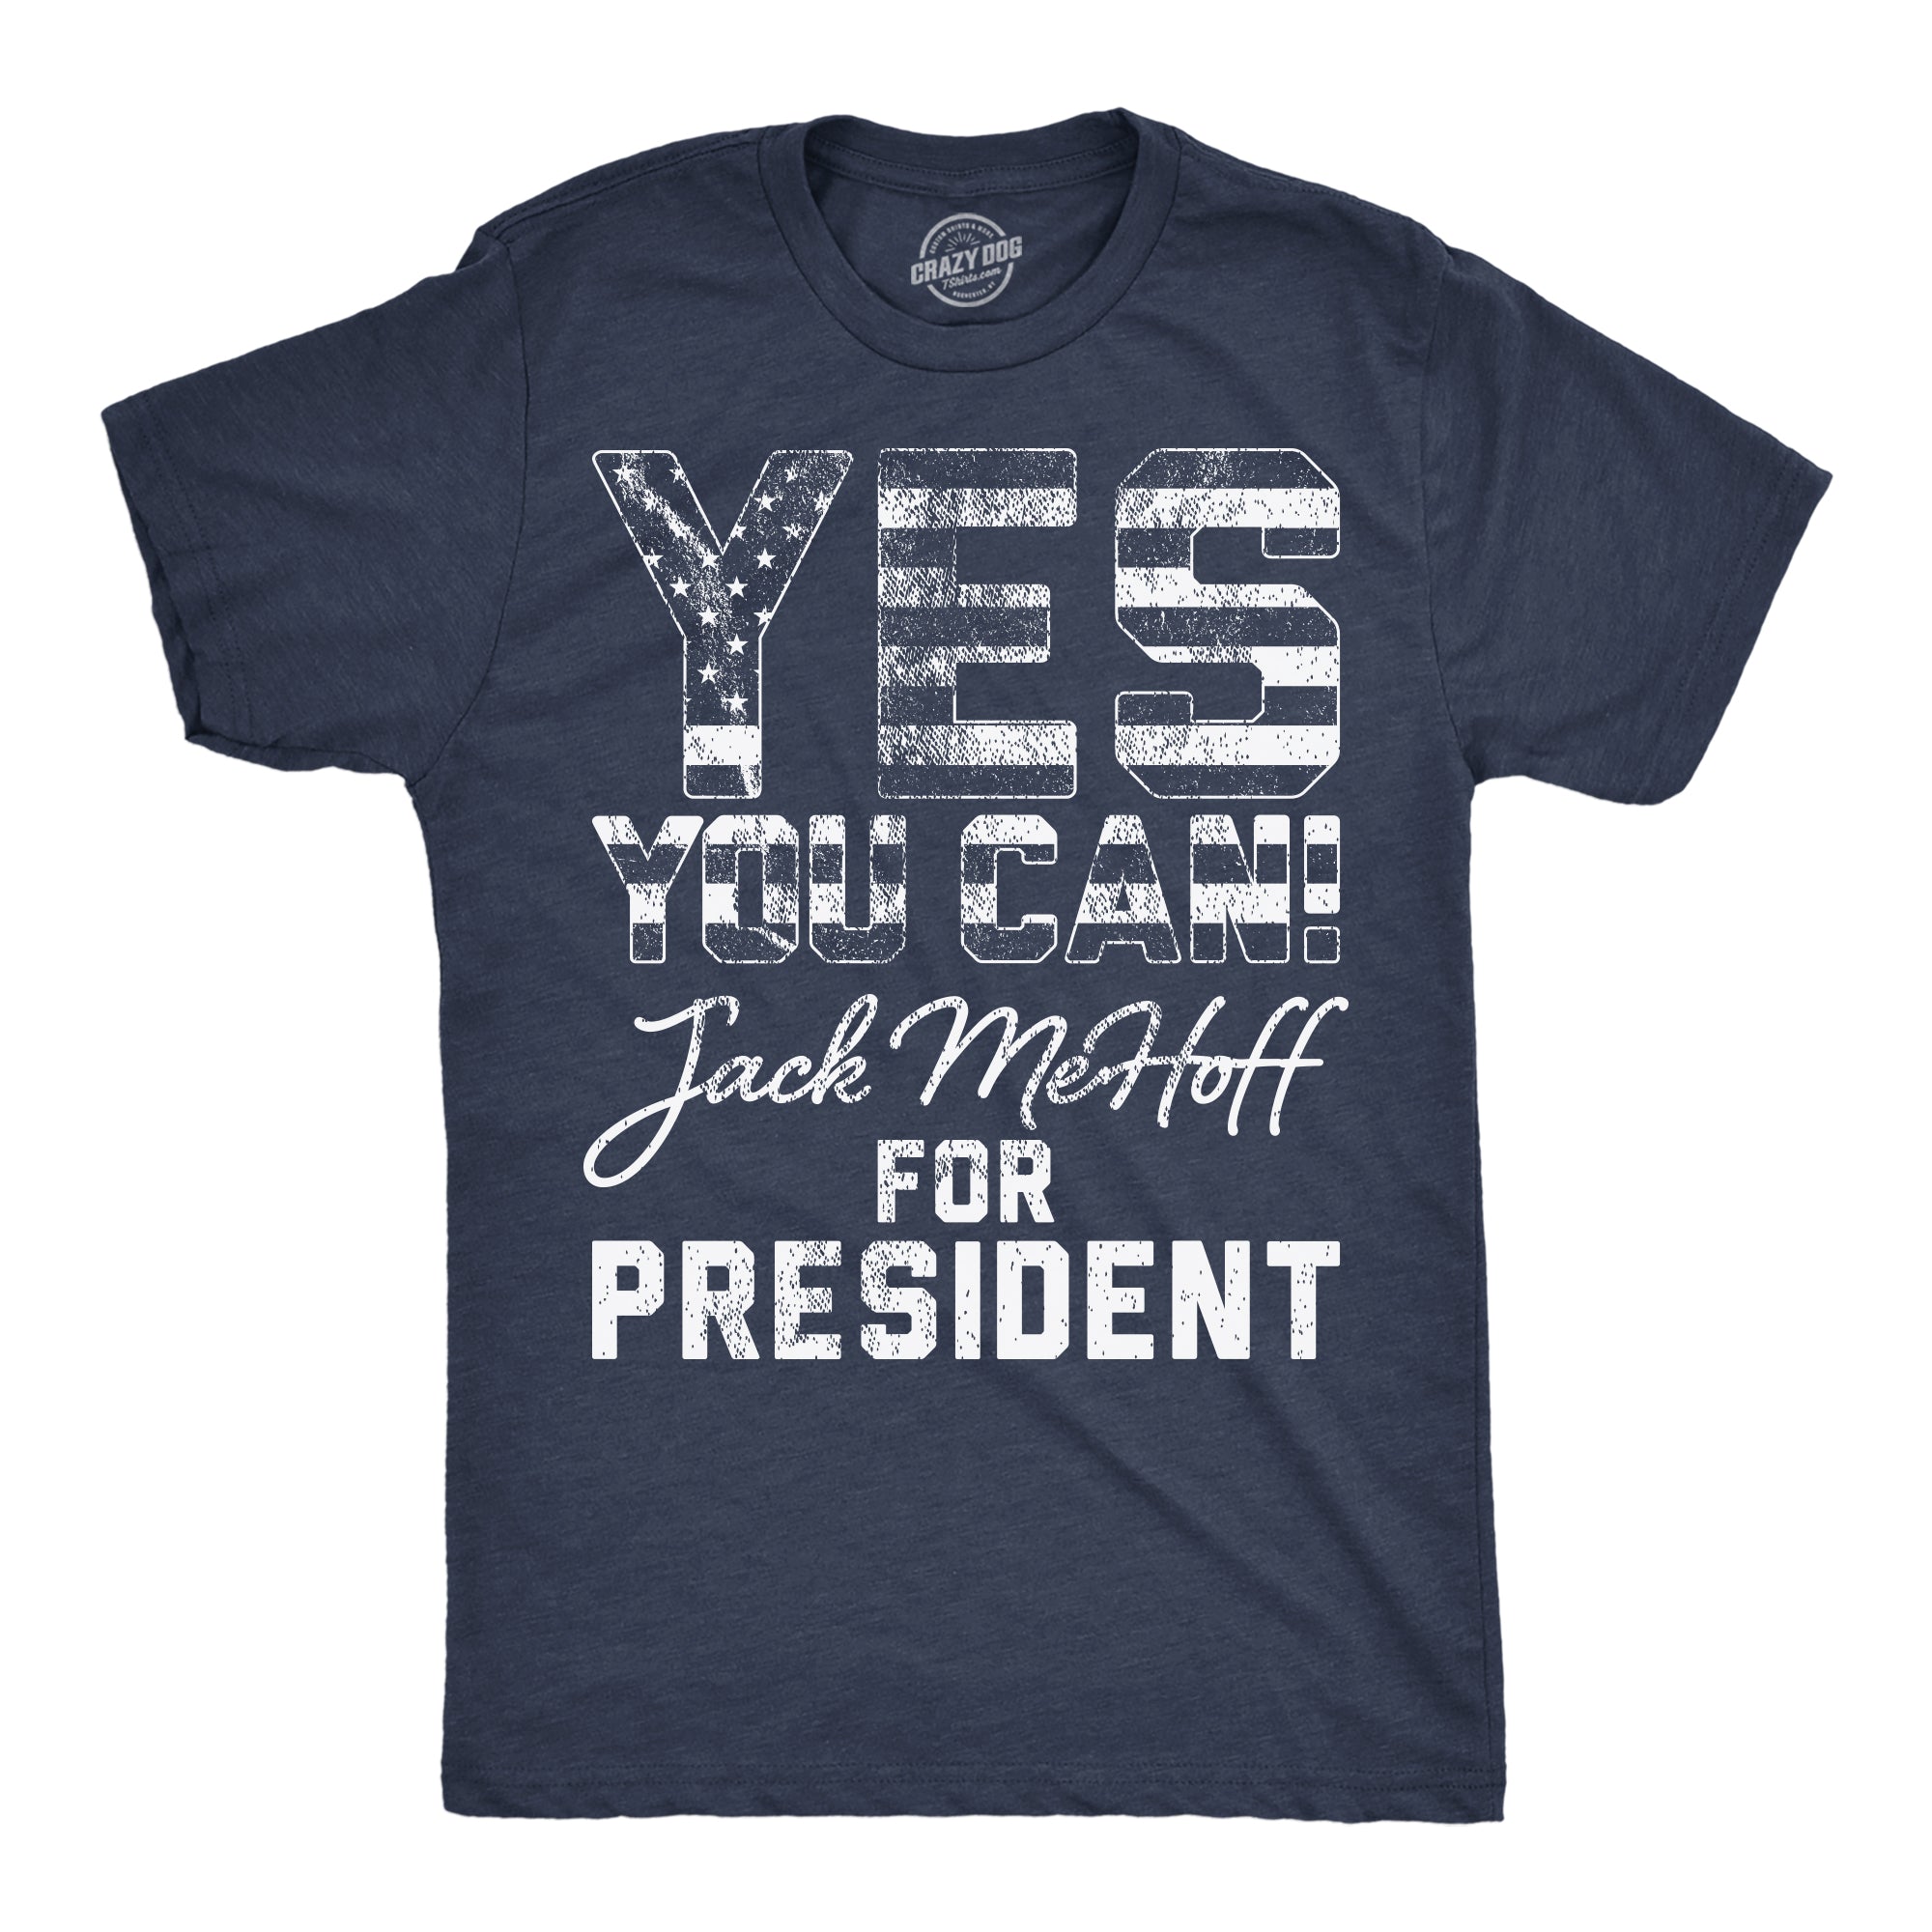 Funny Heather Navy - Yes You Can Jack MeHoff For President Yes You Can Jack MeHoff For President Mens T Shirt Nerdy Political sarcastic sex Tee